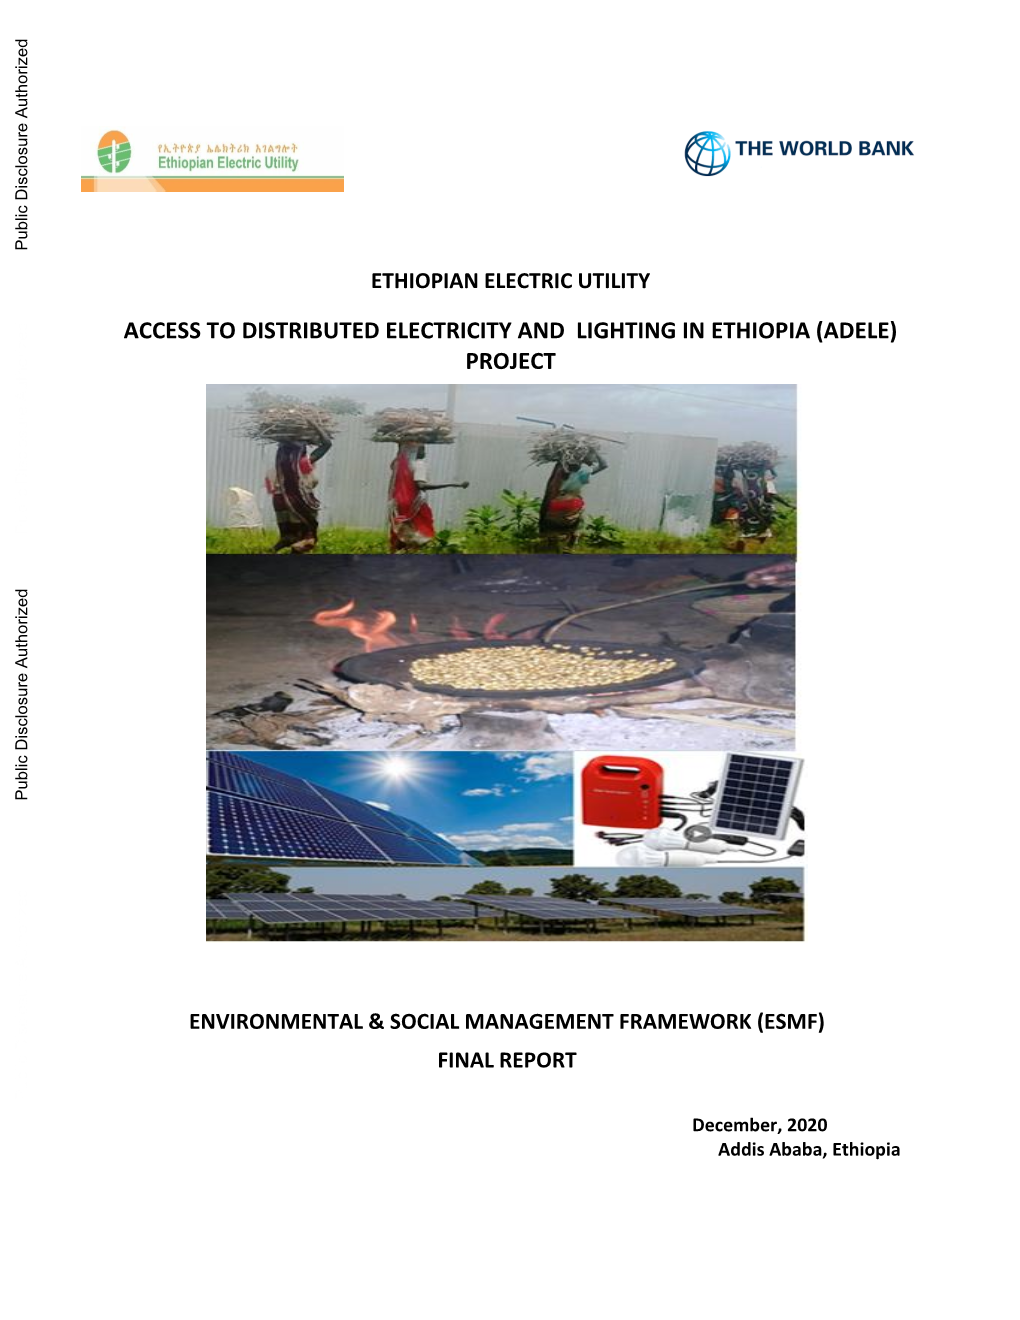 Access to Distributed Electricity and Lighting in Ethiopia (Adele) Project